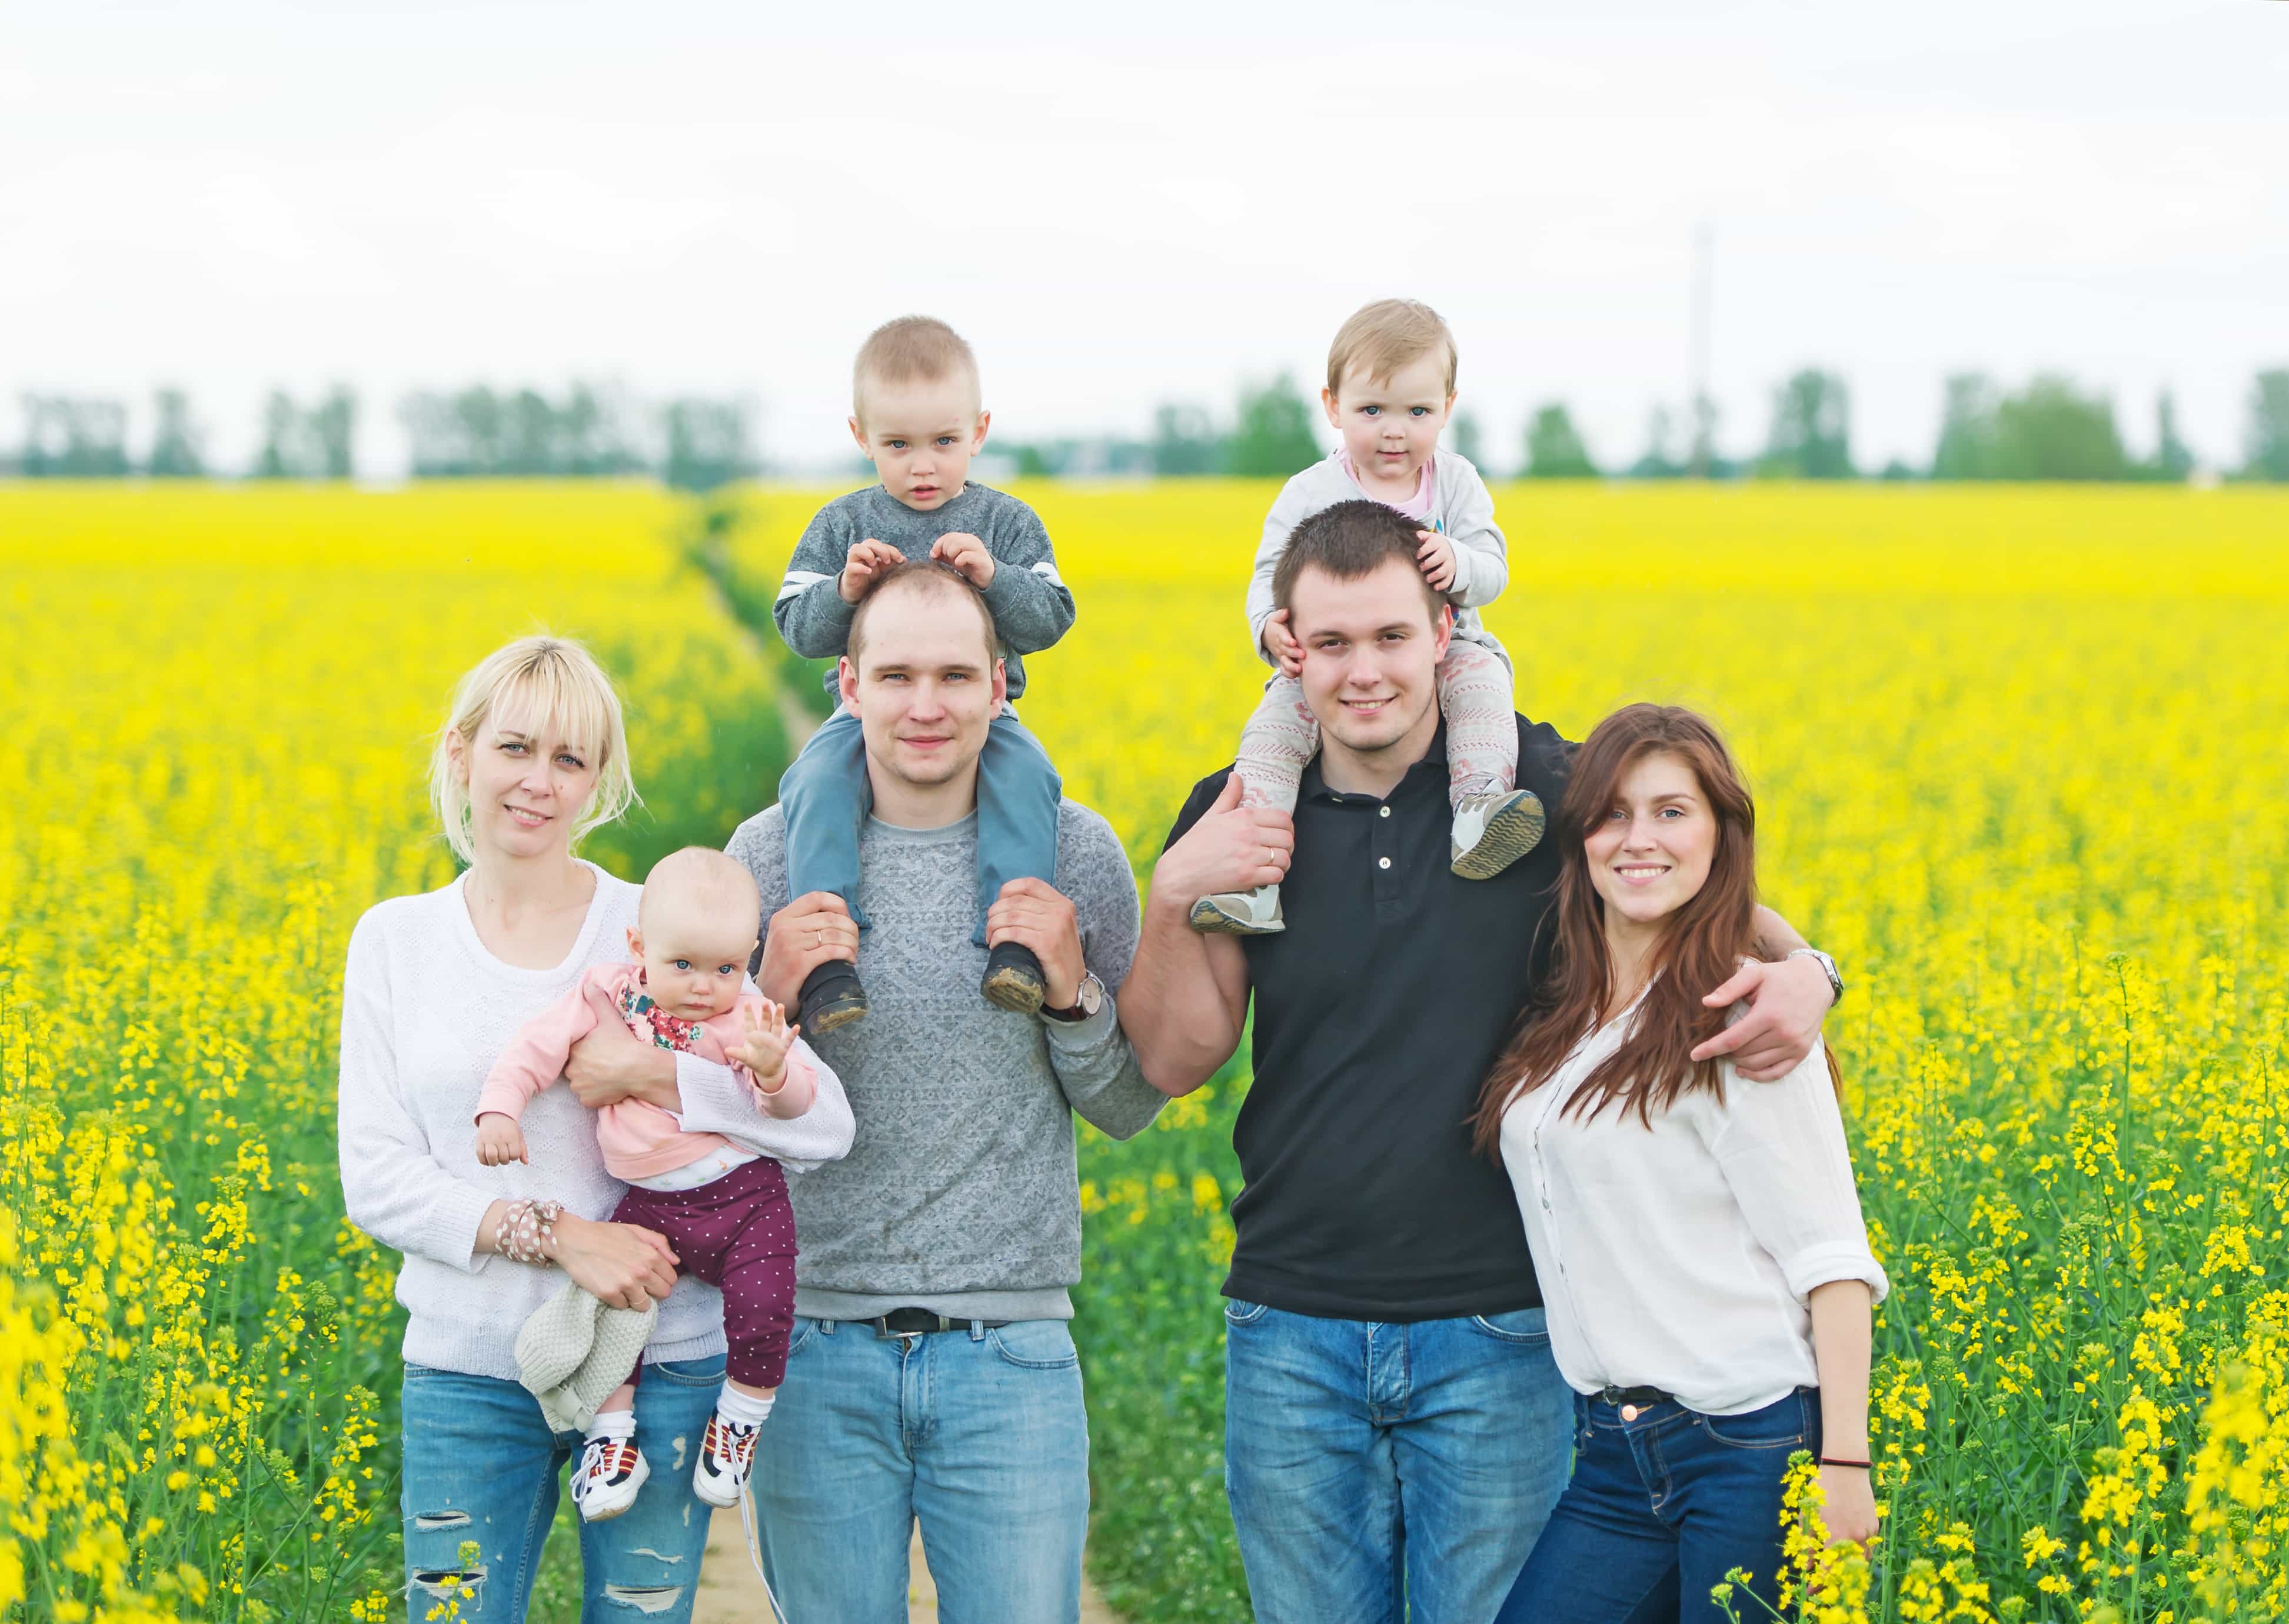 Is your growing family stretching your budget?